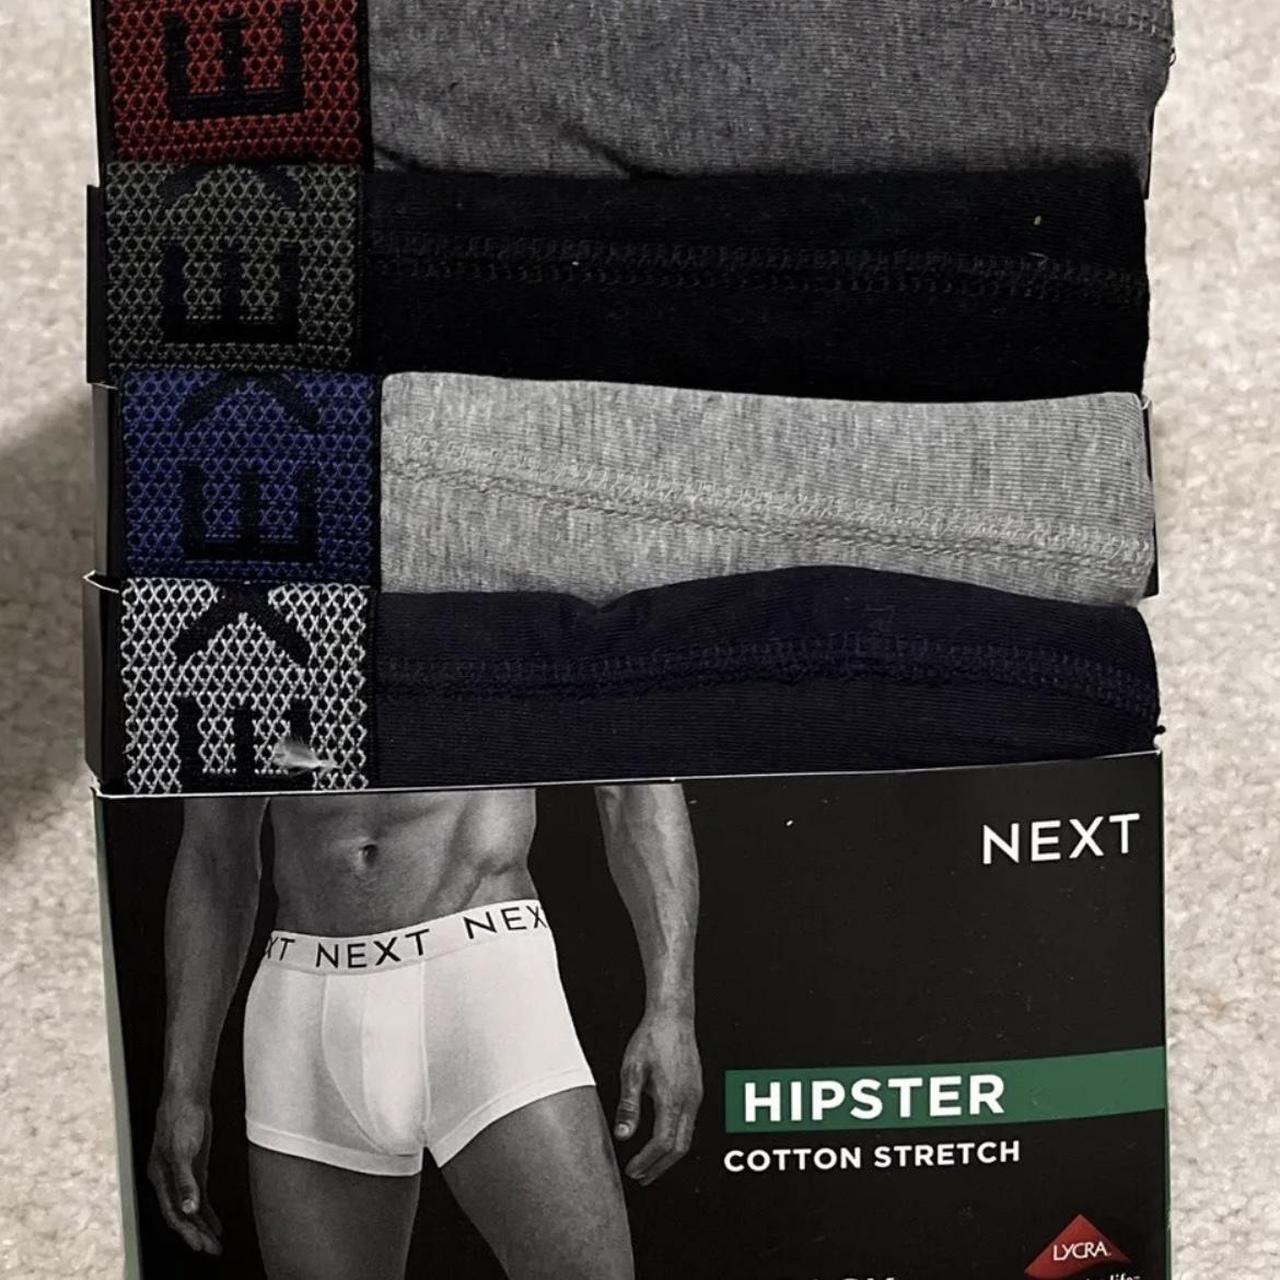 New 4 pack NEXT Shade of black,cotton stretch, - Depop